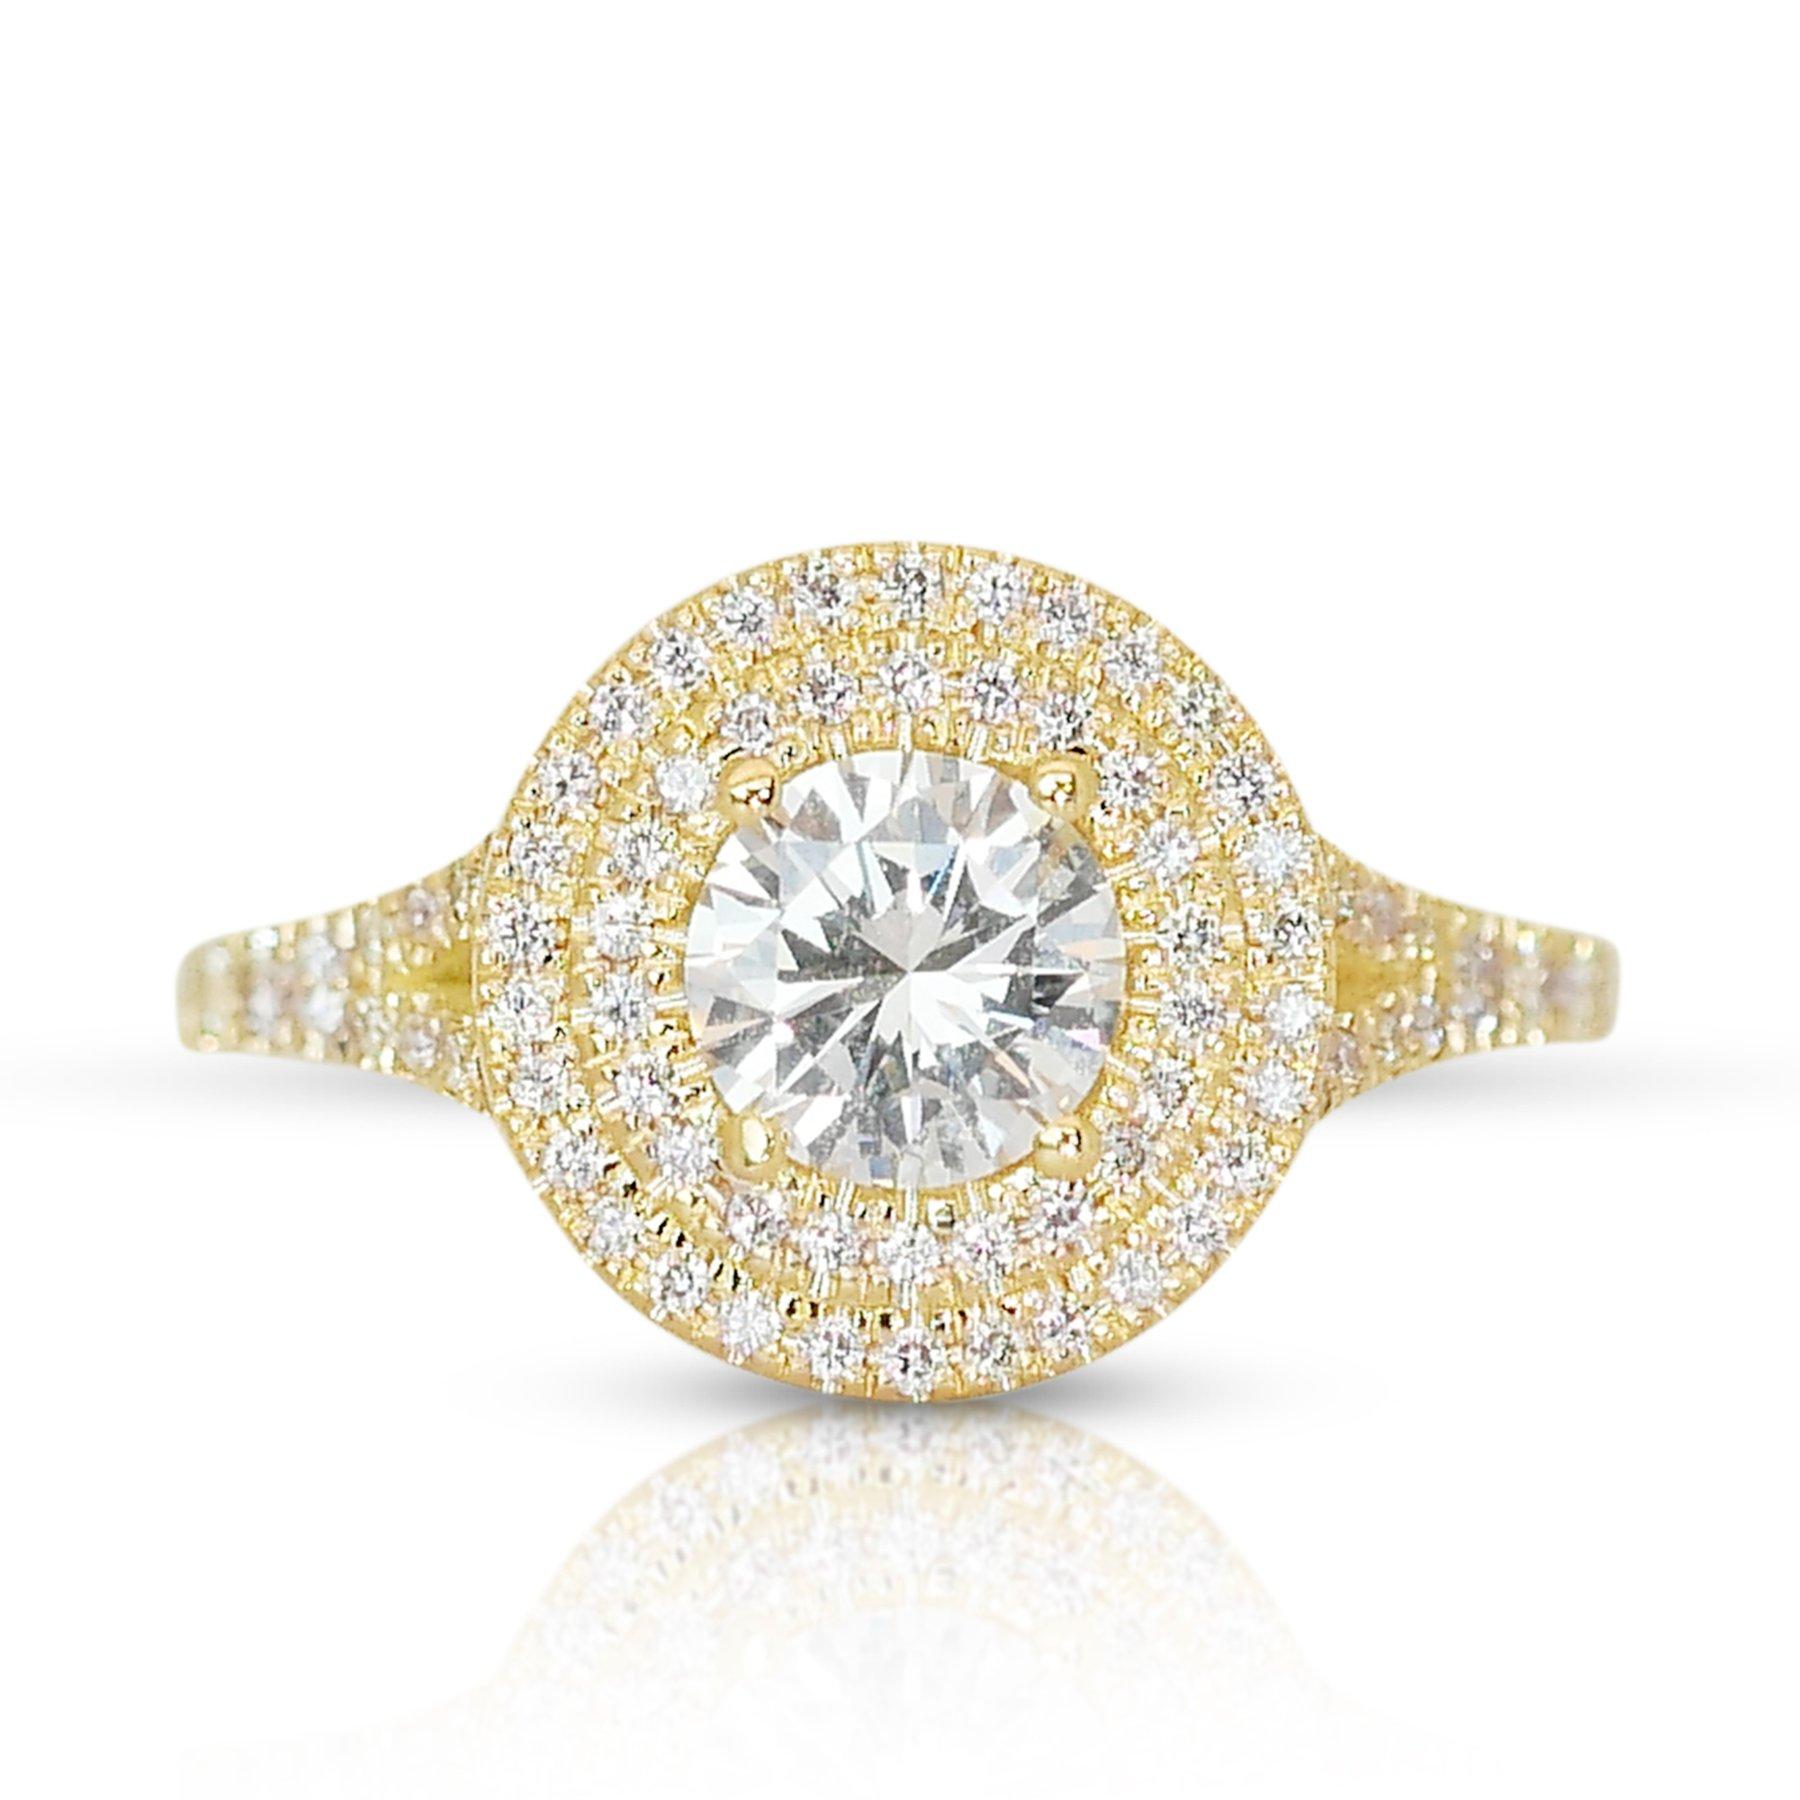 Exquisite 1.44ct Diamond Double Halo Ring in 18k Yellow Gold - GIA Certified For Sale 2